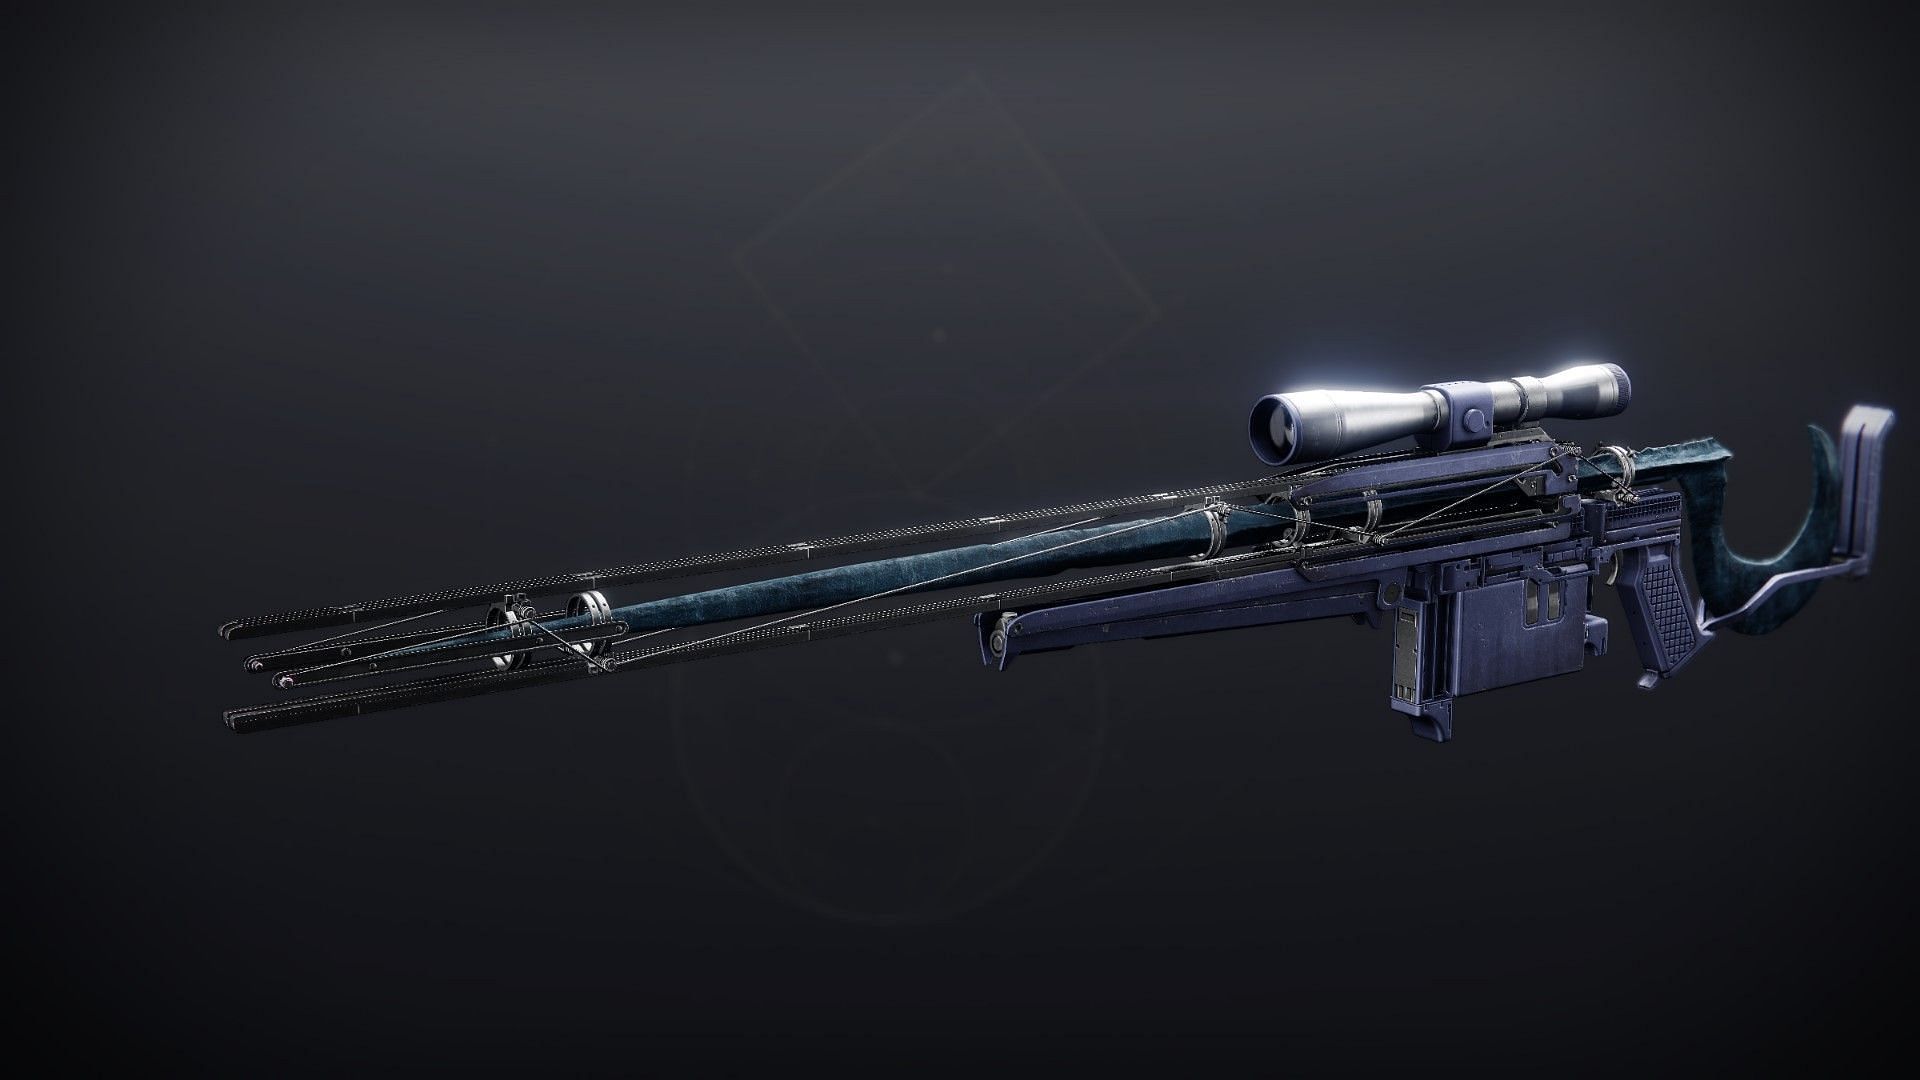 The Cloudstrike is an Exotic Sniper Rifle in the game (Image via Bungie)